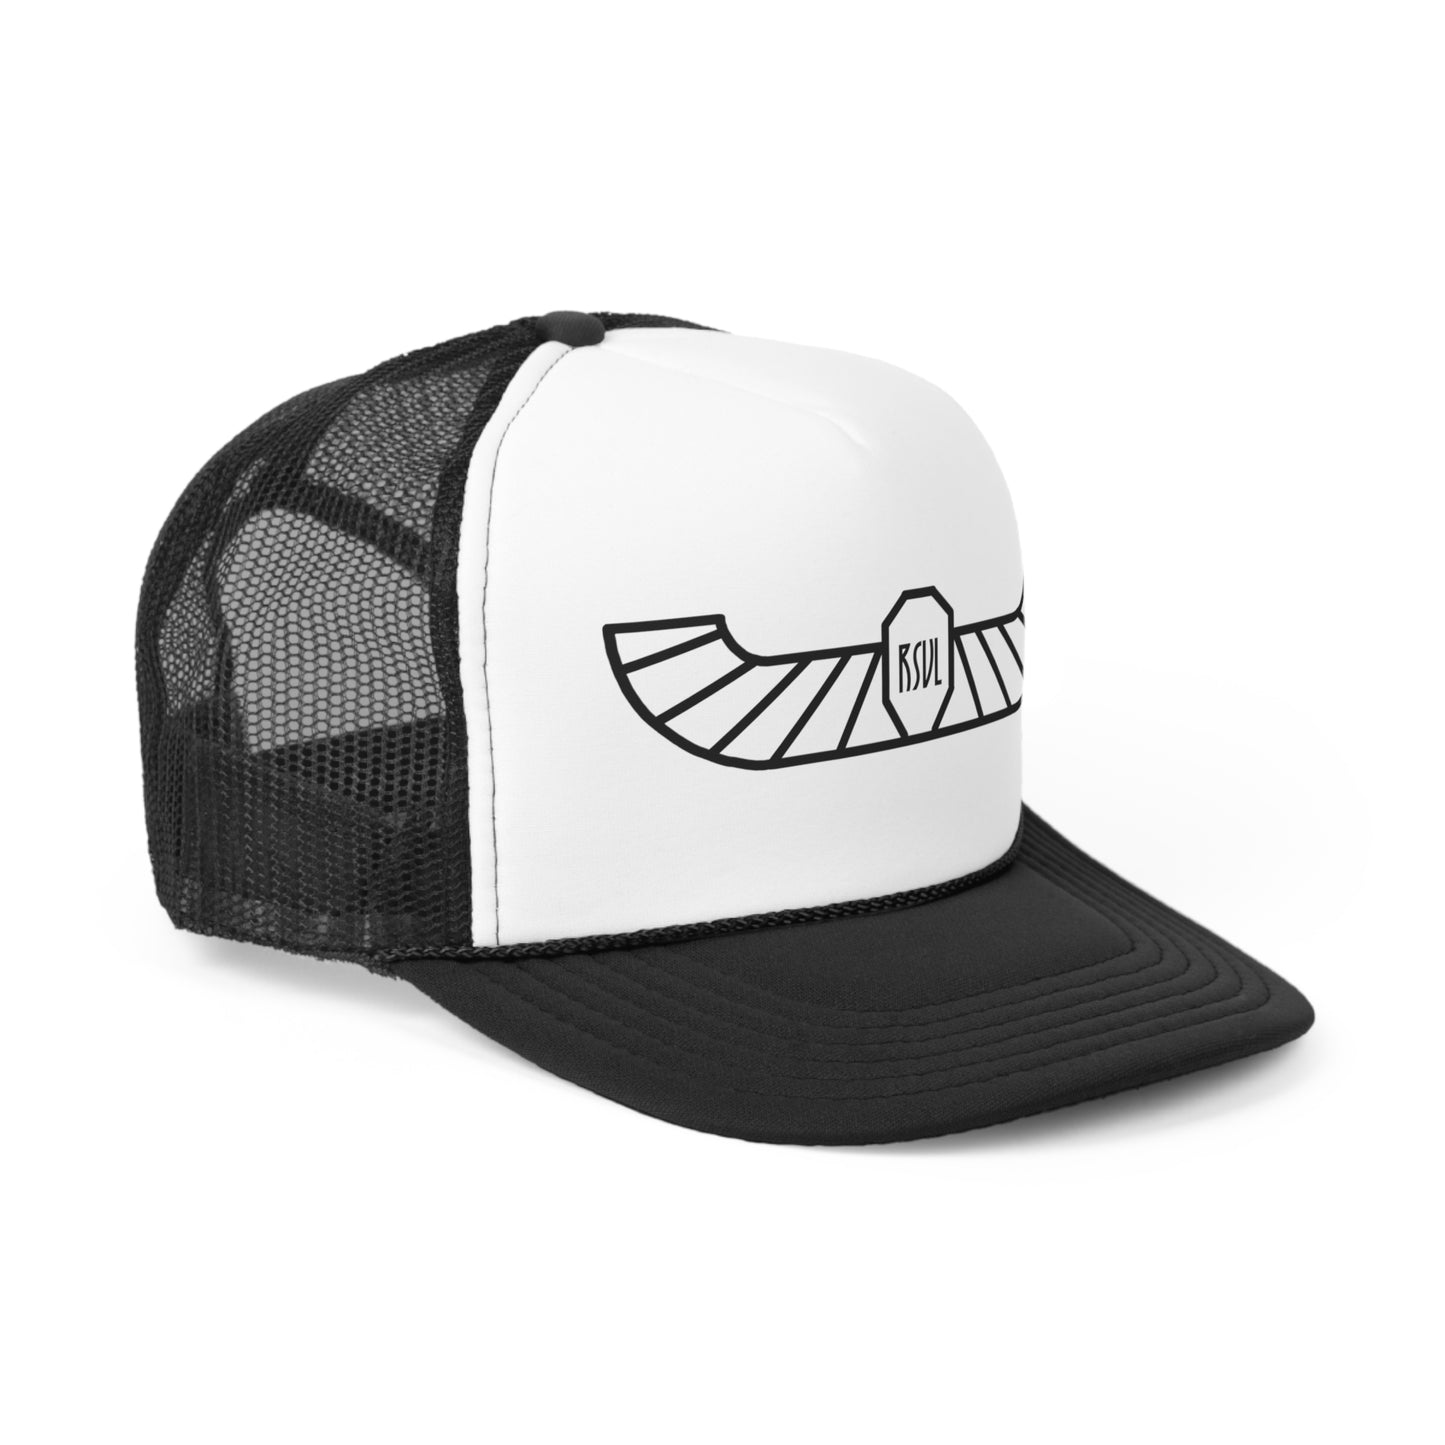 Courthouse Wings Trucker Caps